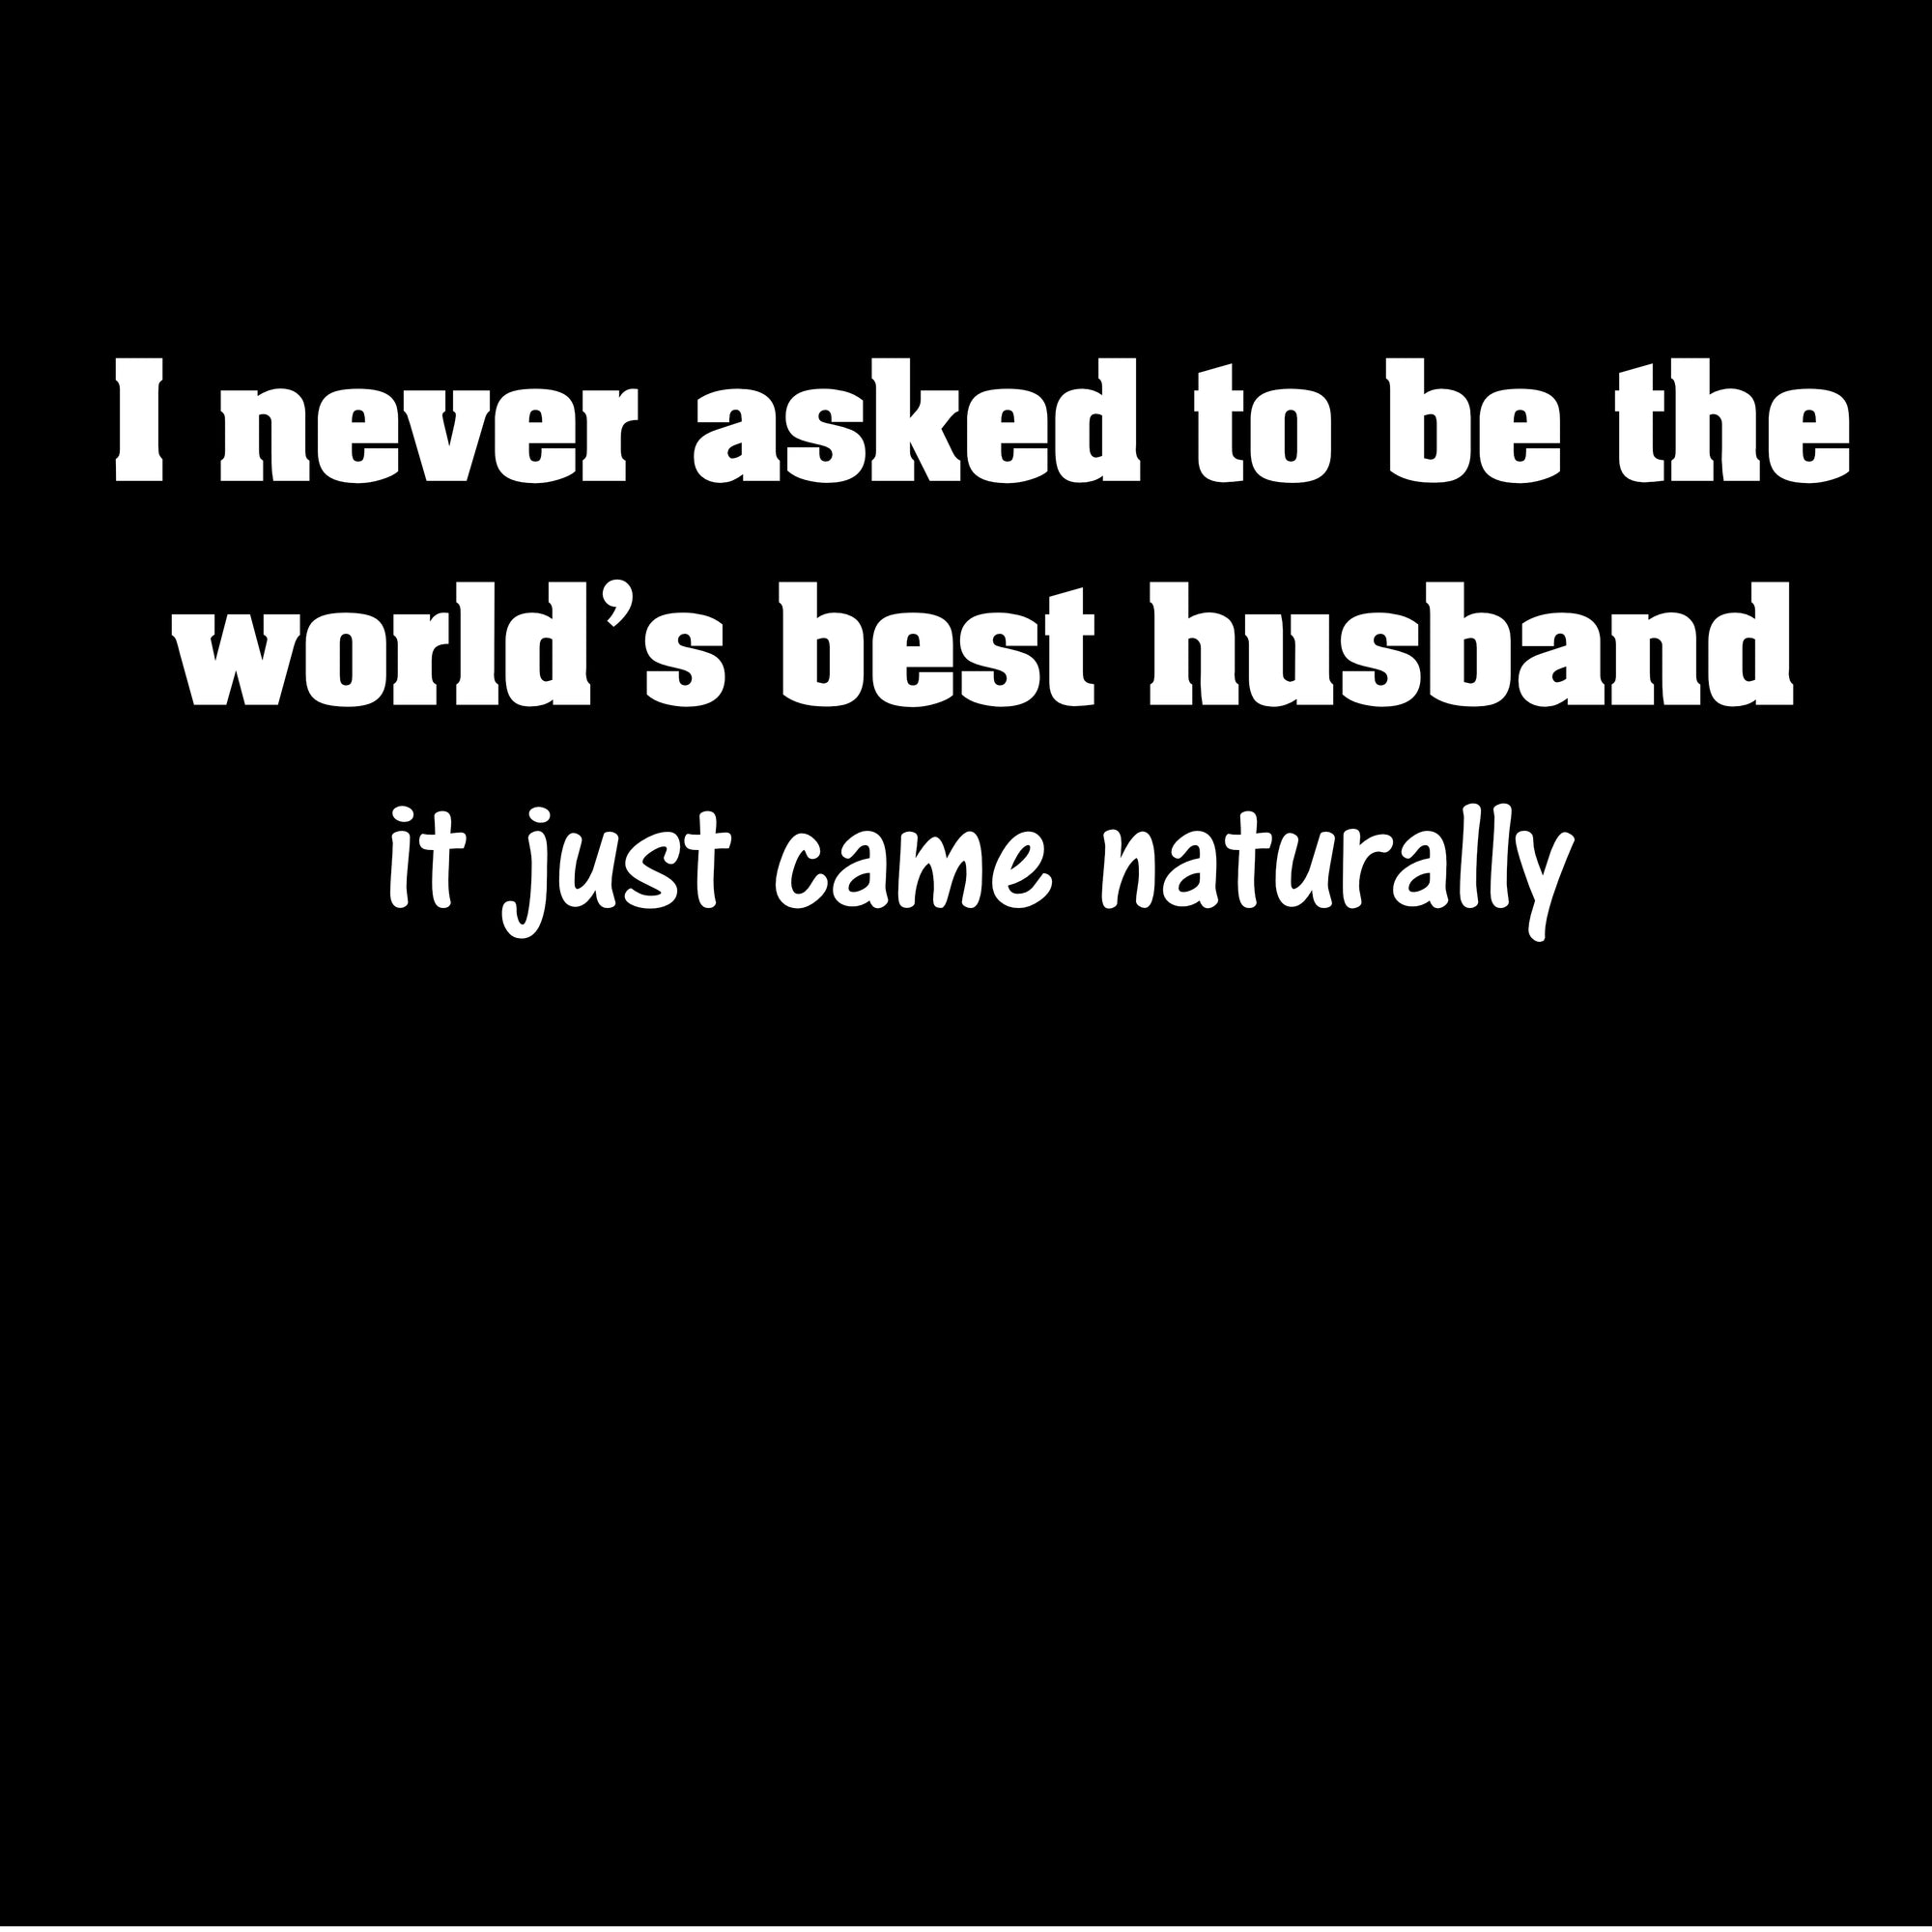 I Never Asked to be the World's Best Husband Printed T-Shirt-Sand